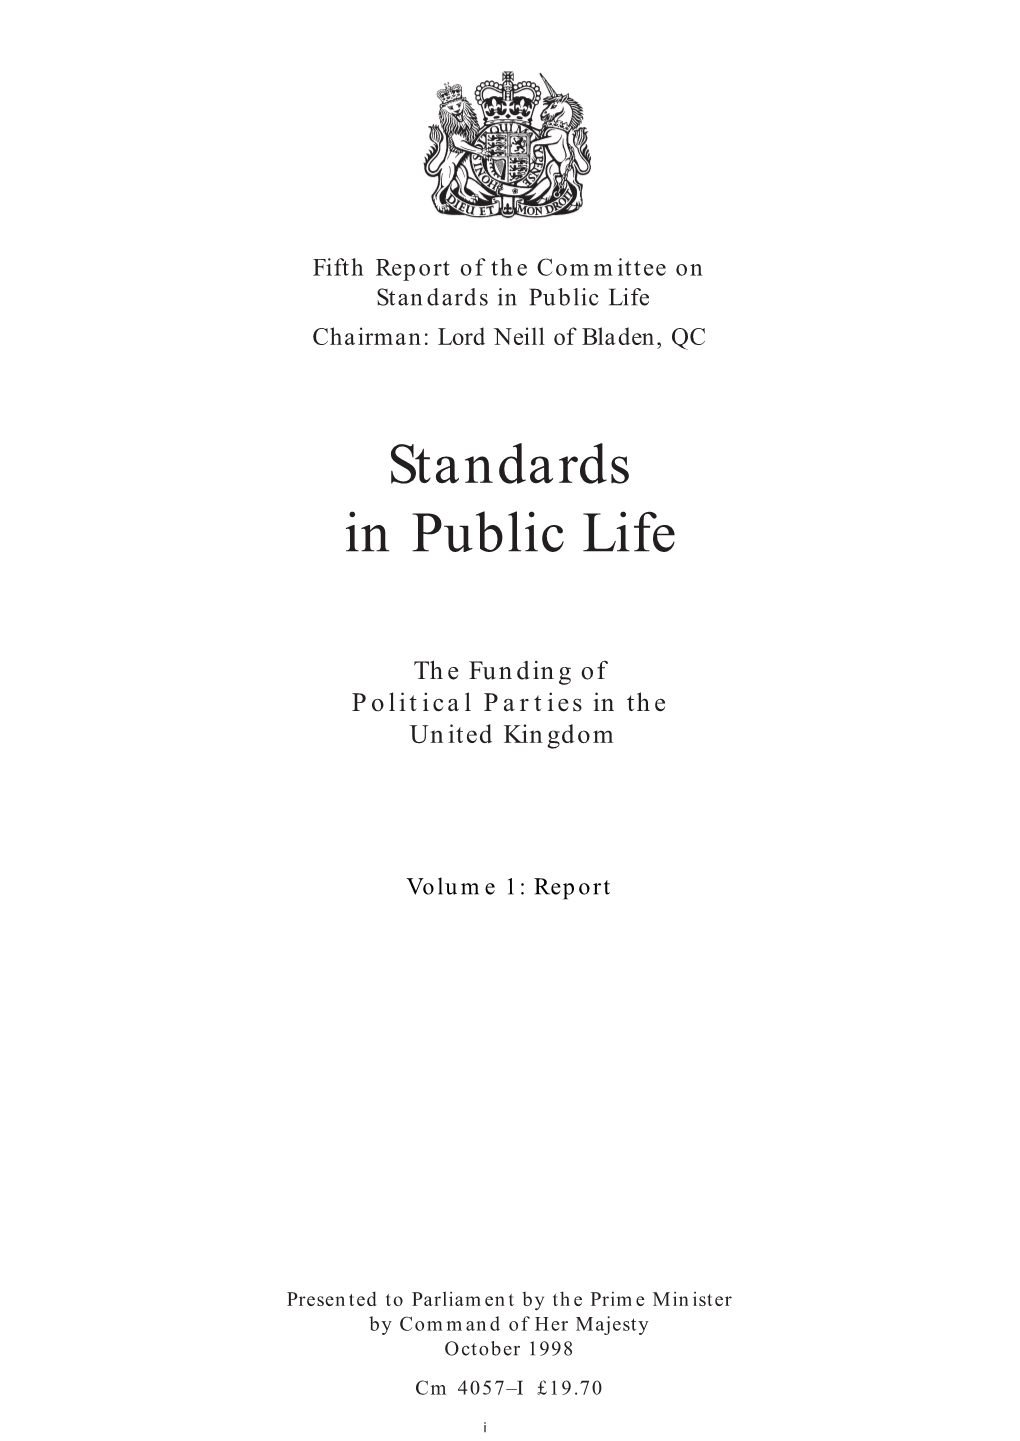 Fifth Report of the Committee on Standards in Public Life Chairman: Lord Neill of Bladen, QC